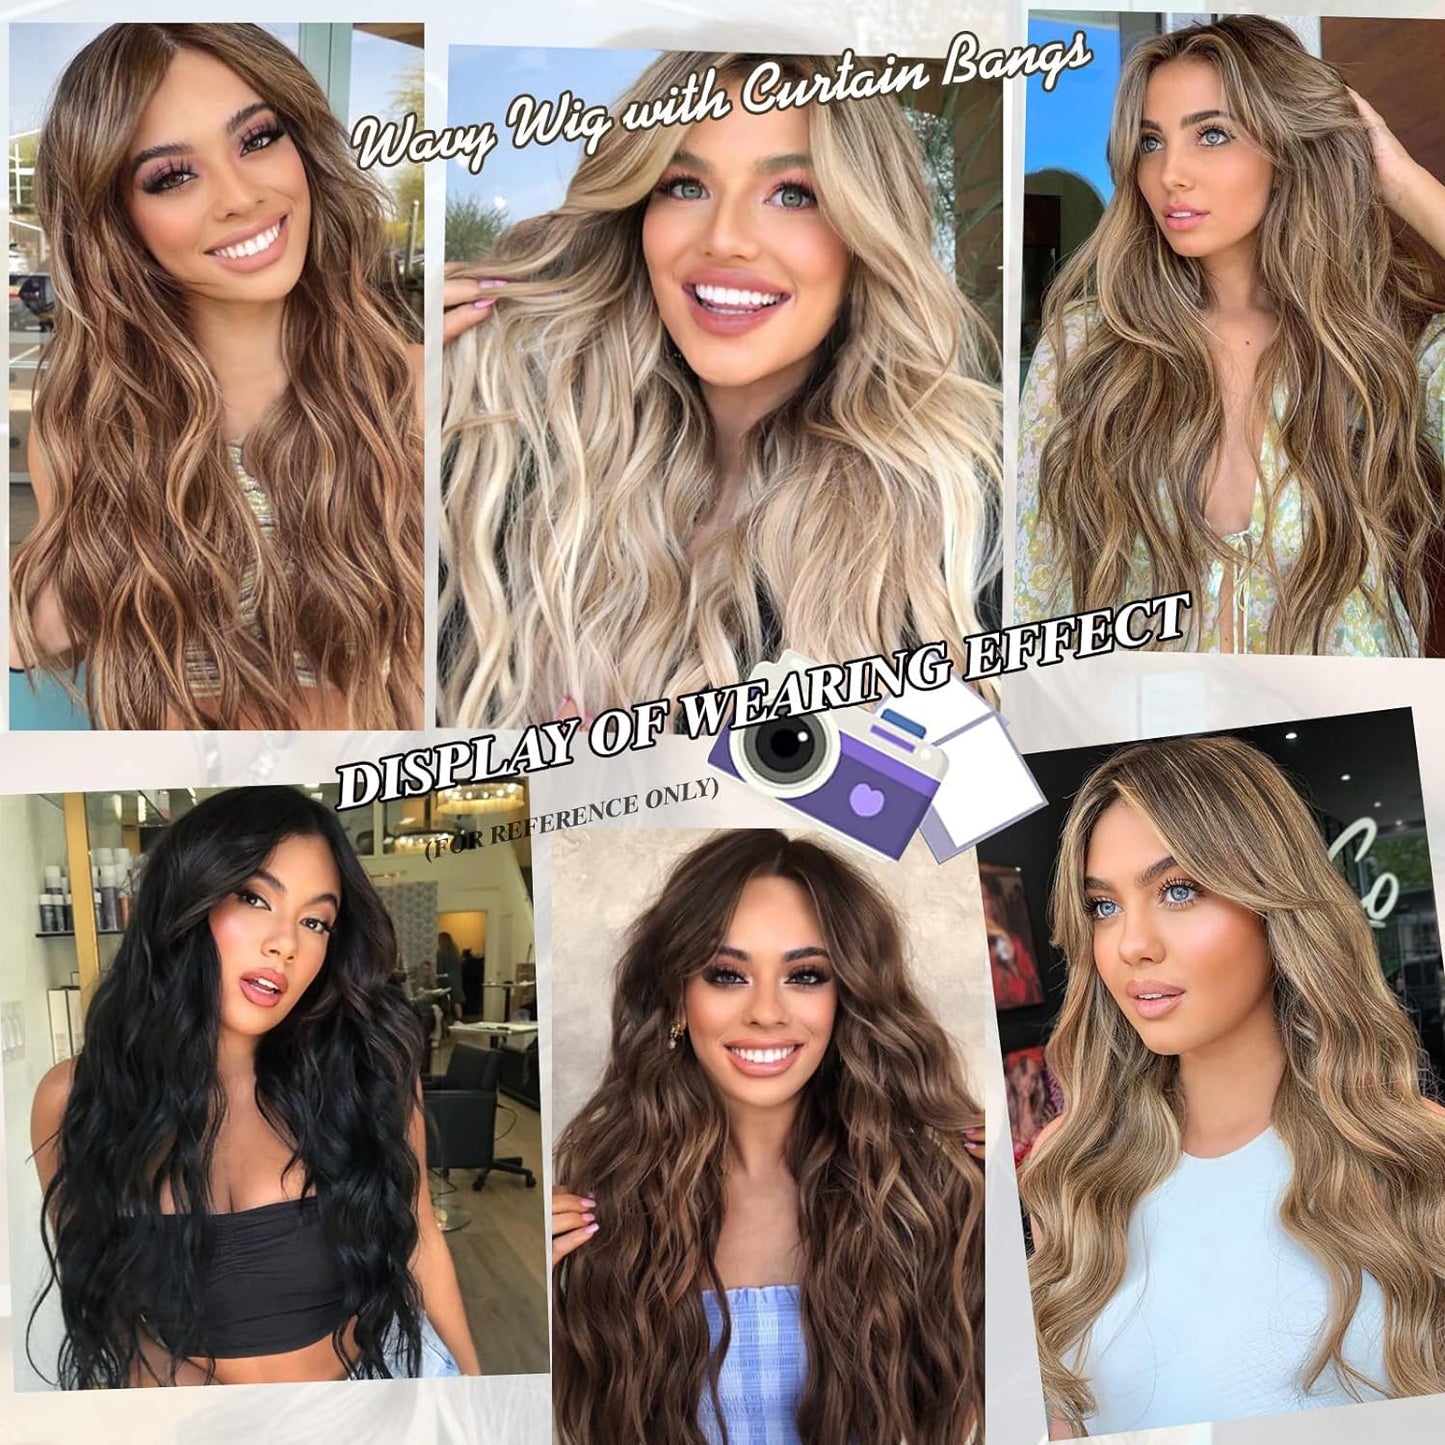 Gray Wigs for Women Silver Wig with Curtain Bangs Layered Wig Long Wavy Gray Ombre Wig Shoulder-Length Long Haired Wig Synthetic Light Grey Wig Natural Real Hair Wig for Daily Party Use